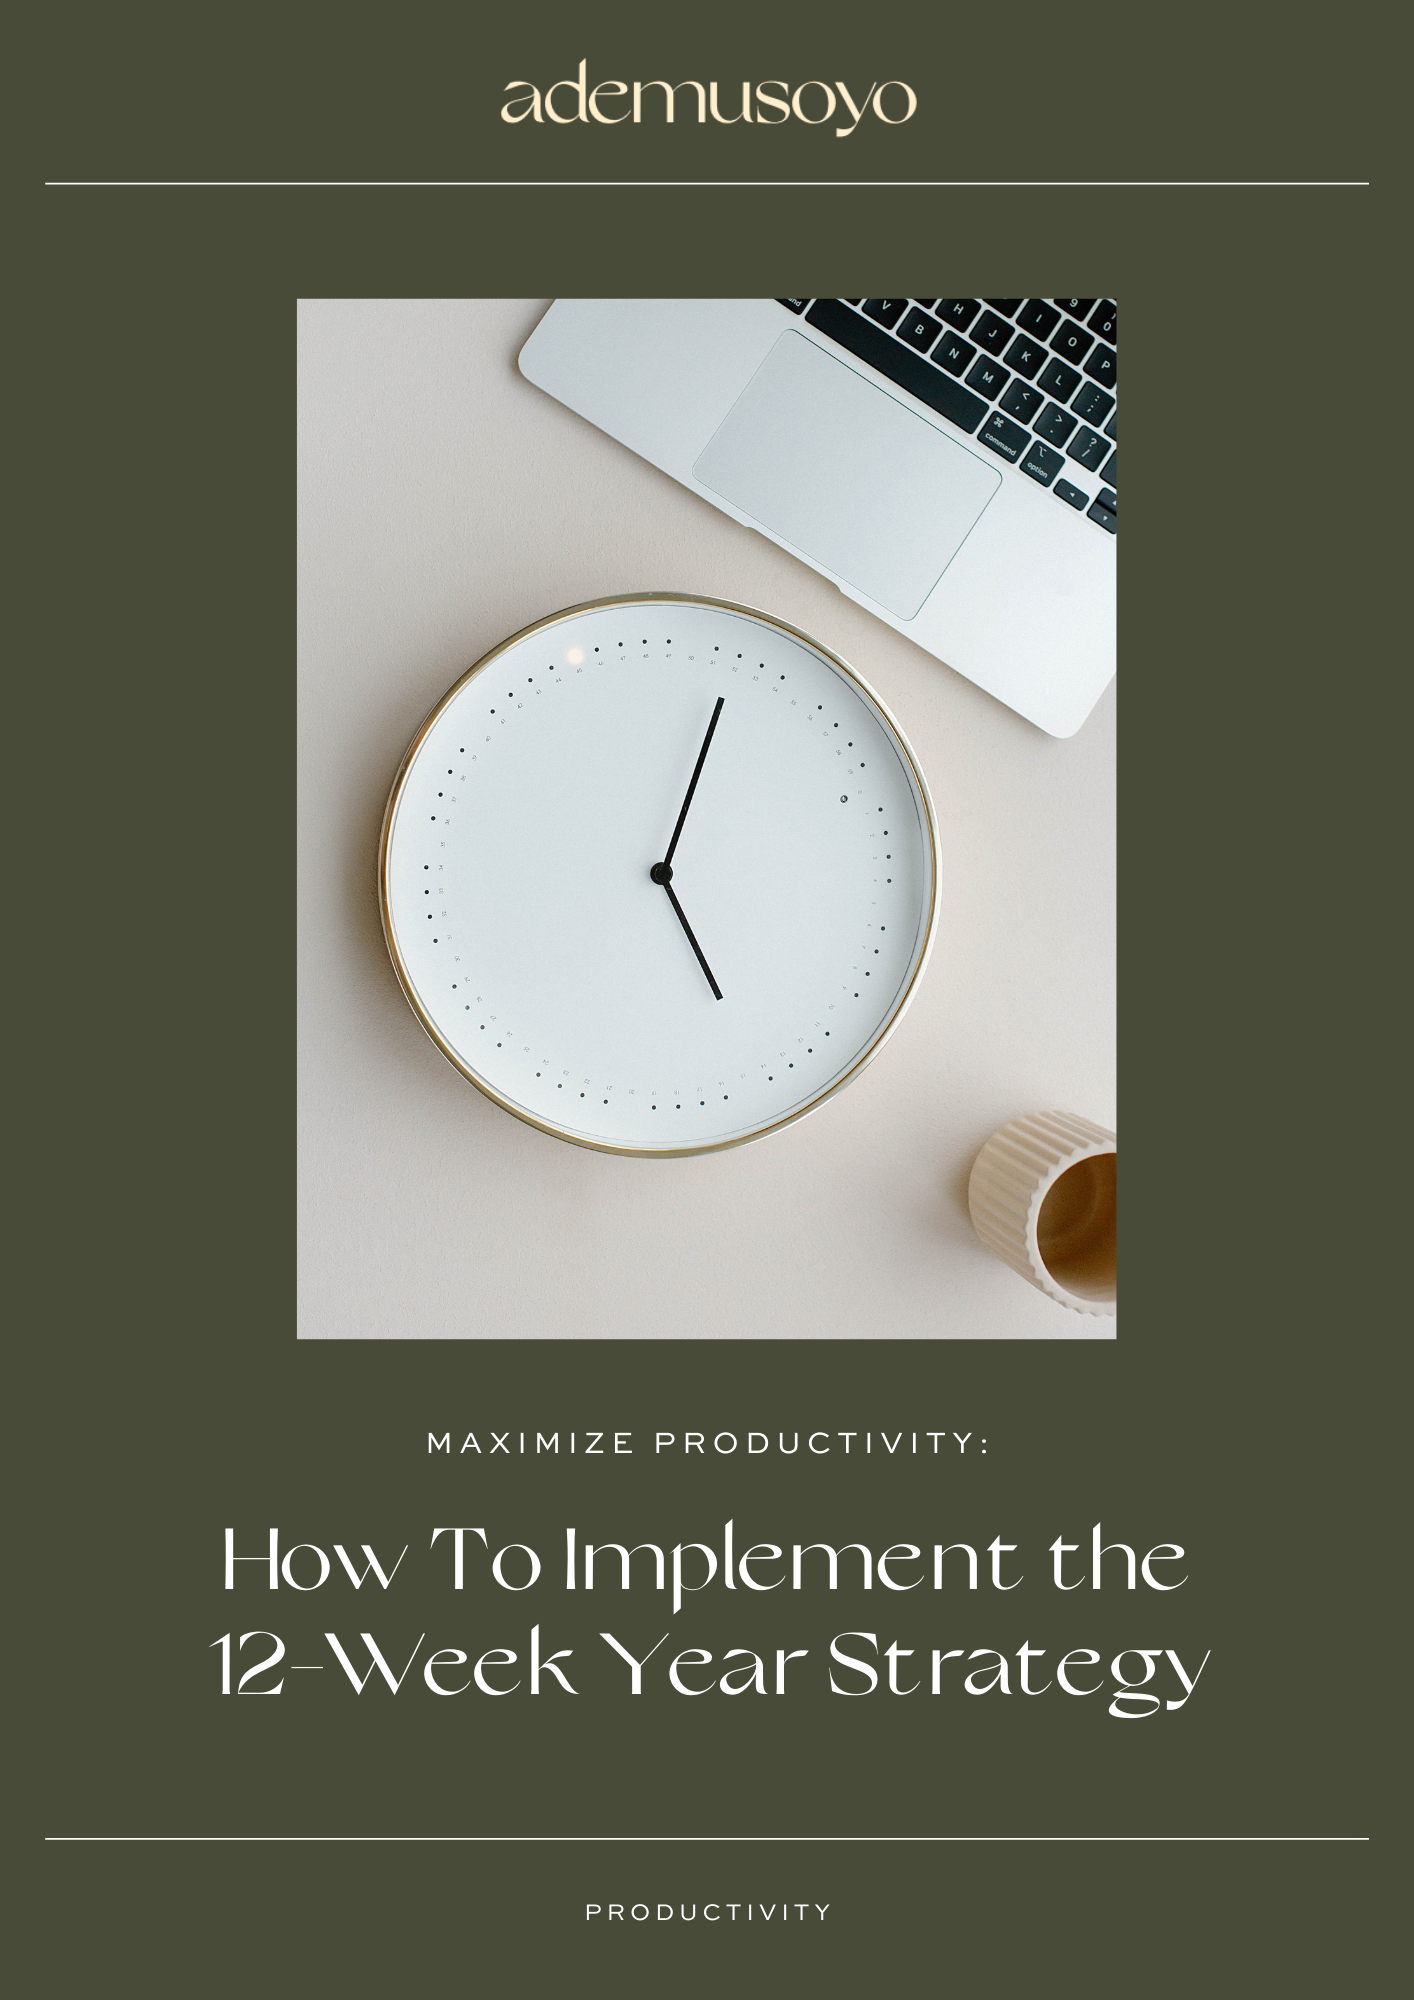 a blog cover image with a clock and a laptop keyboard shown and a text overlay of maximize productivity: how to implement the 12-week year strategy